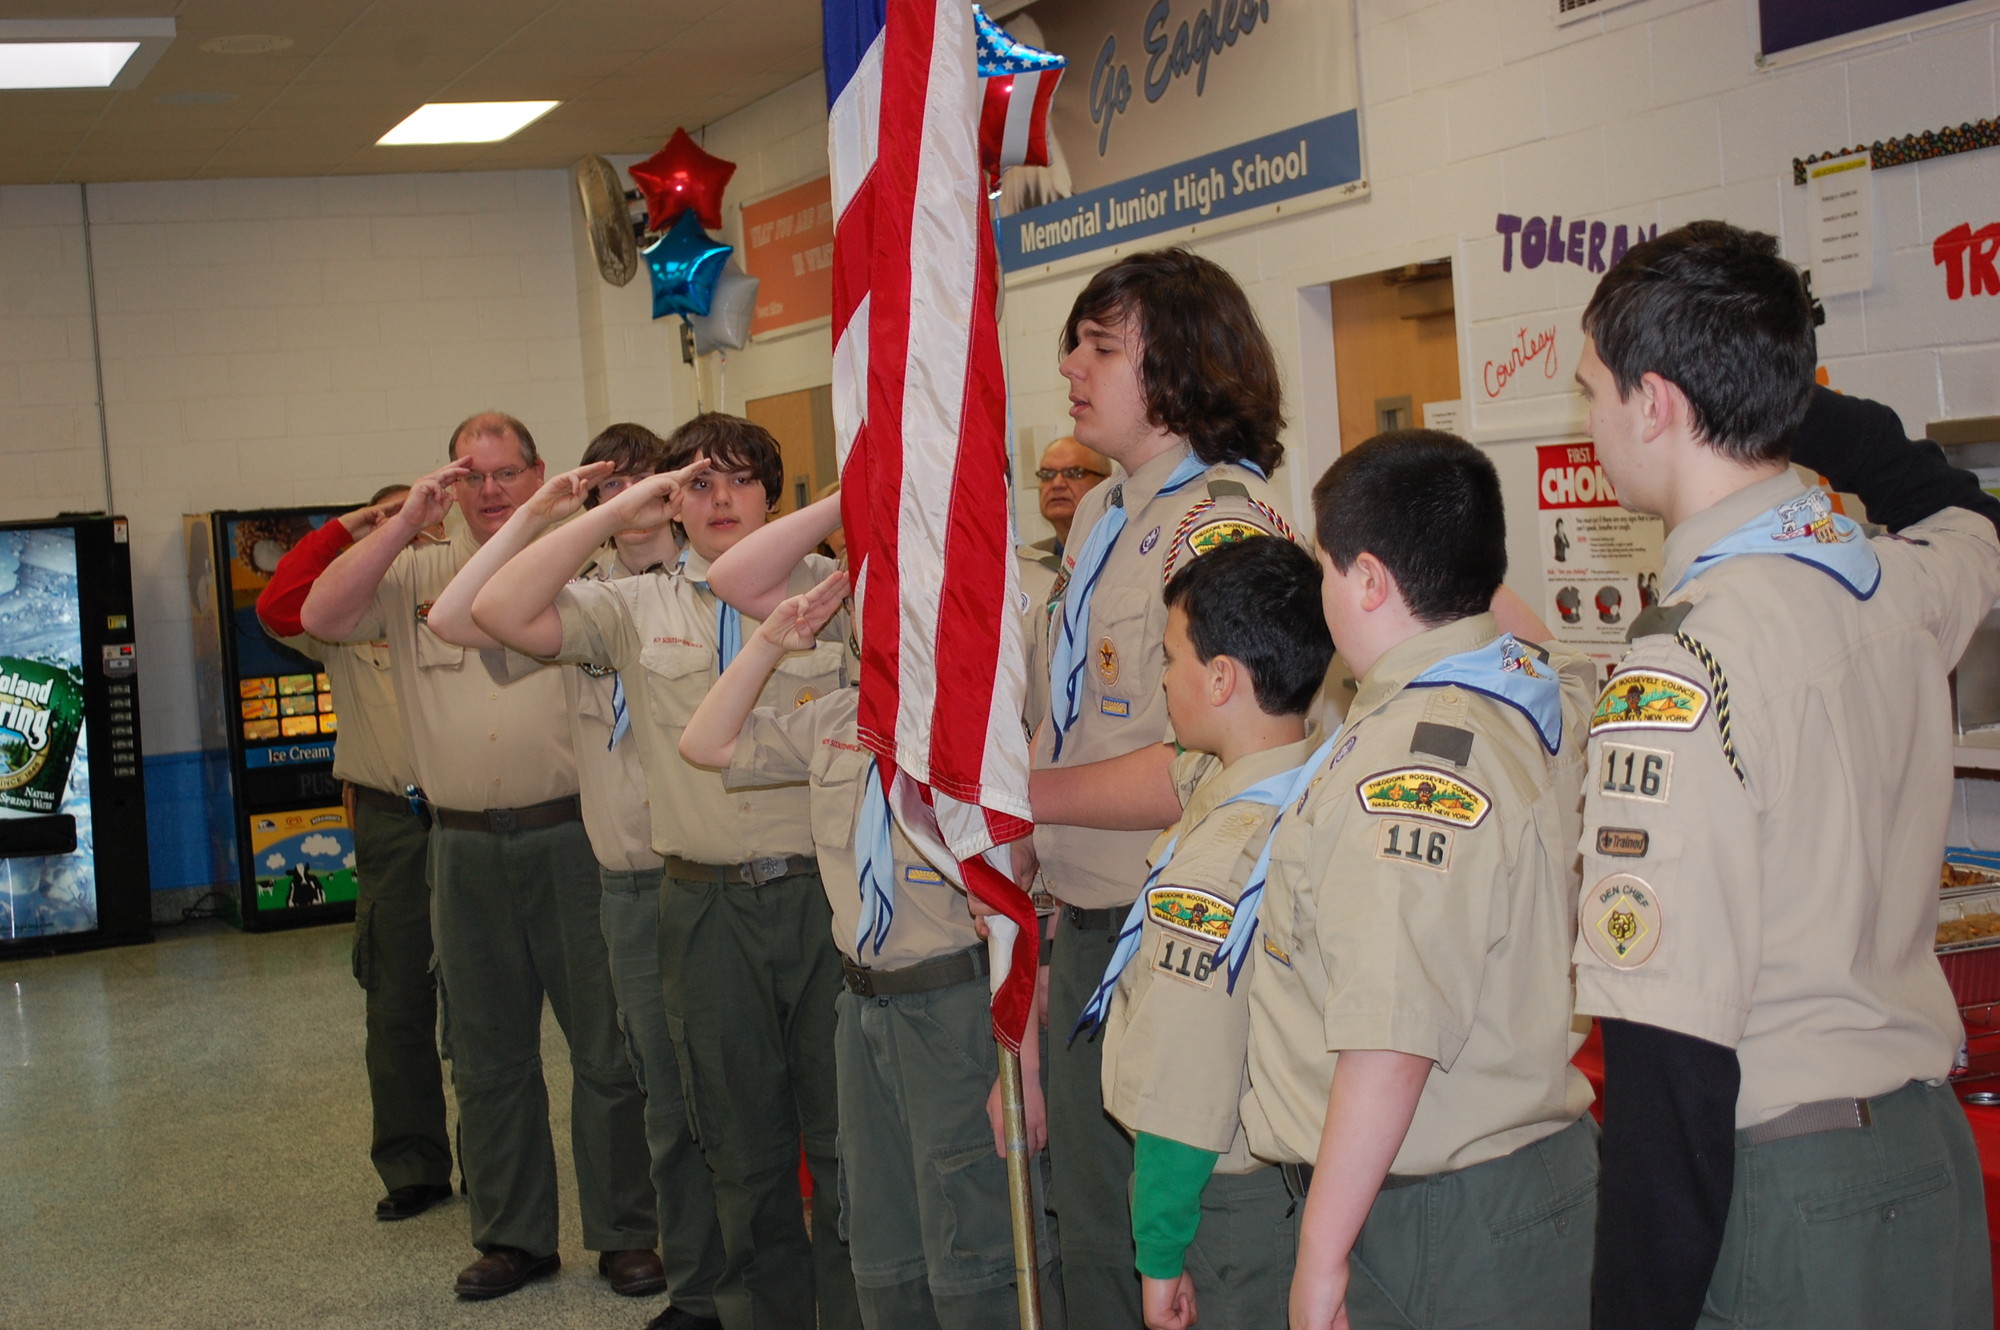 Boy Scout Troop 116 led the crowd in the Pledge of Allegiance.